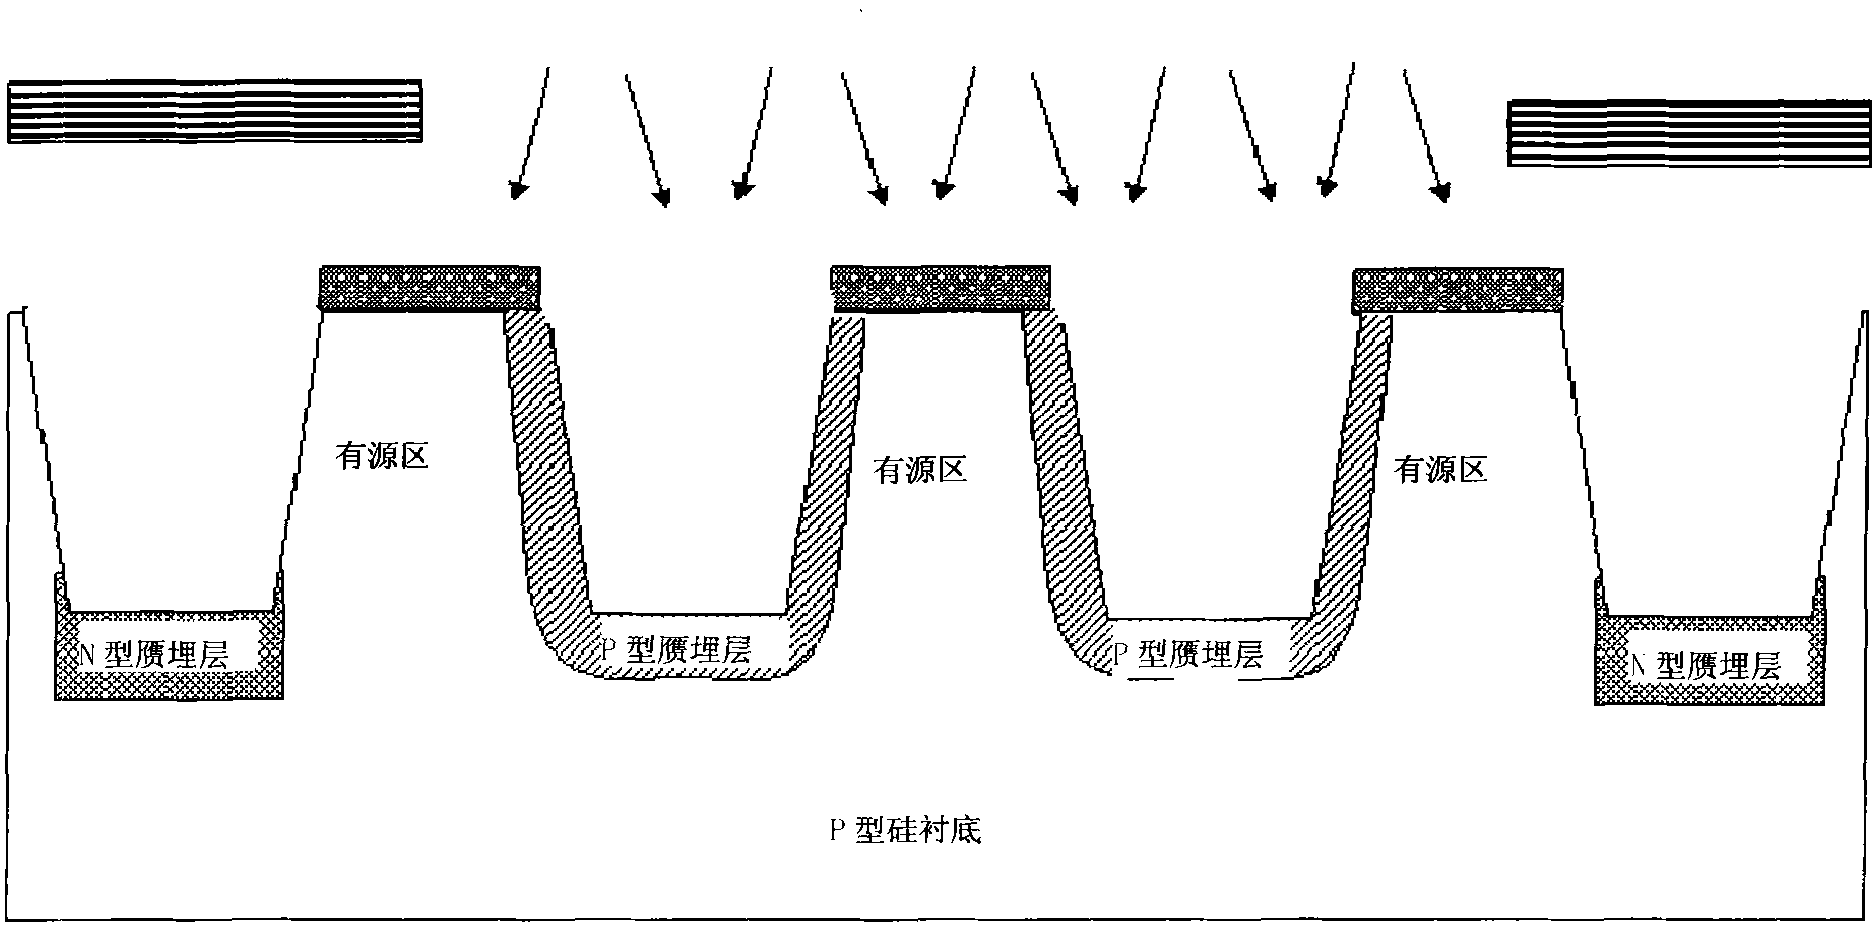 Parasitic PIN(positive-intrinsic negative) diode in BiCMOS(Bipolar Complementary Metal Oxide Semiconductor) process, and manufacturing method thereof